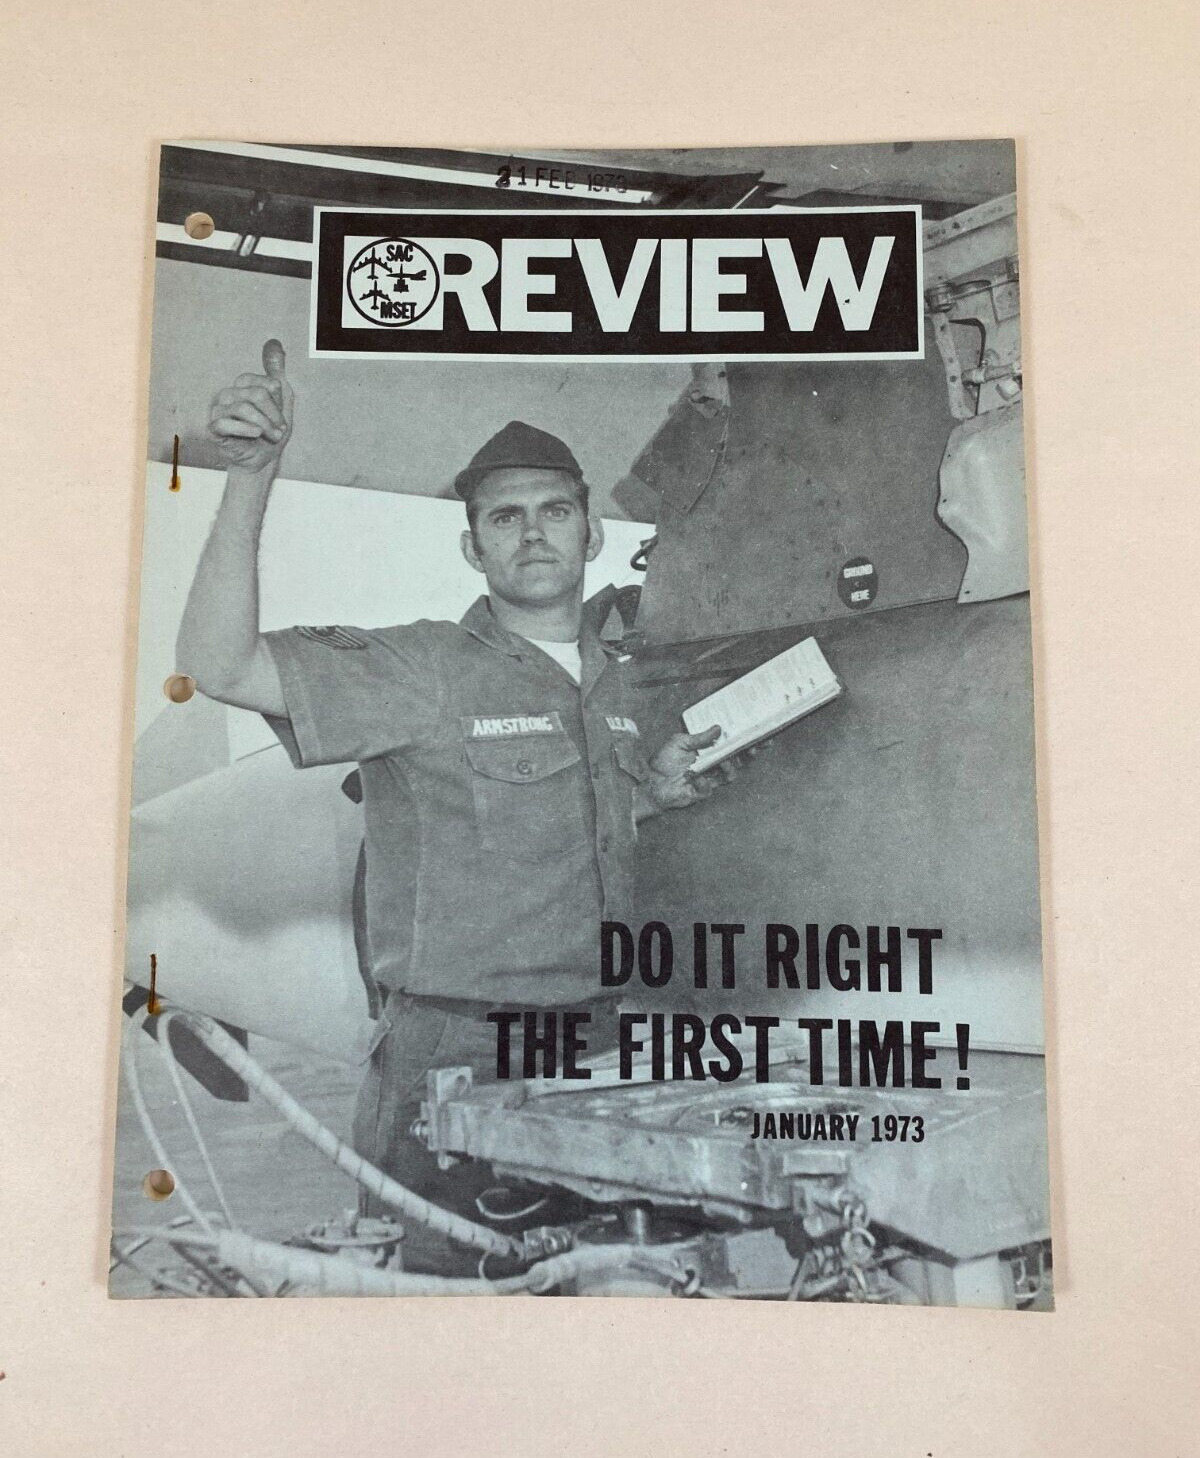 1973 REVIEW SAC MSET DO IT RIGHT THE FIRST TIME SACRP GG 2 AIRFORCE PUBLICATION